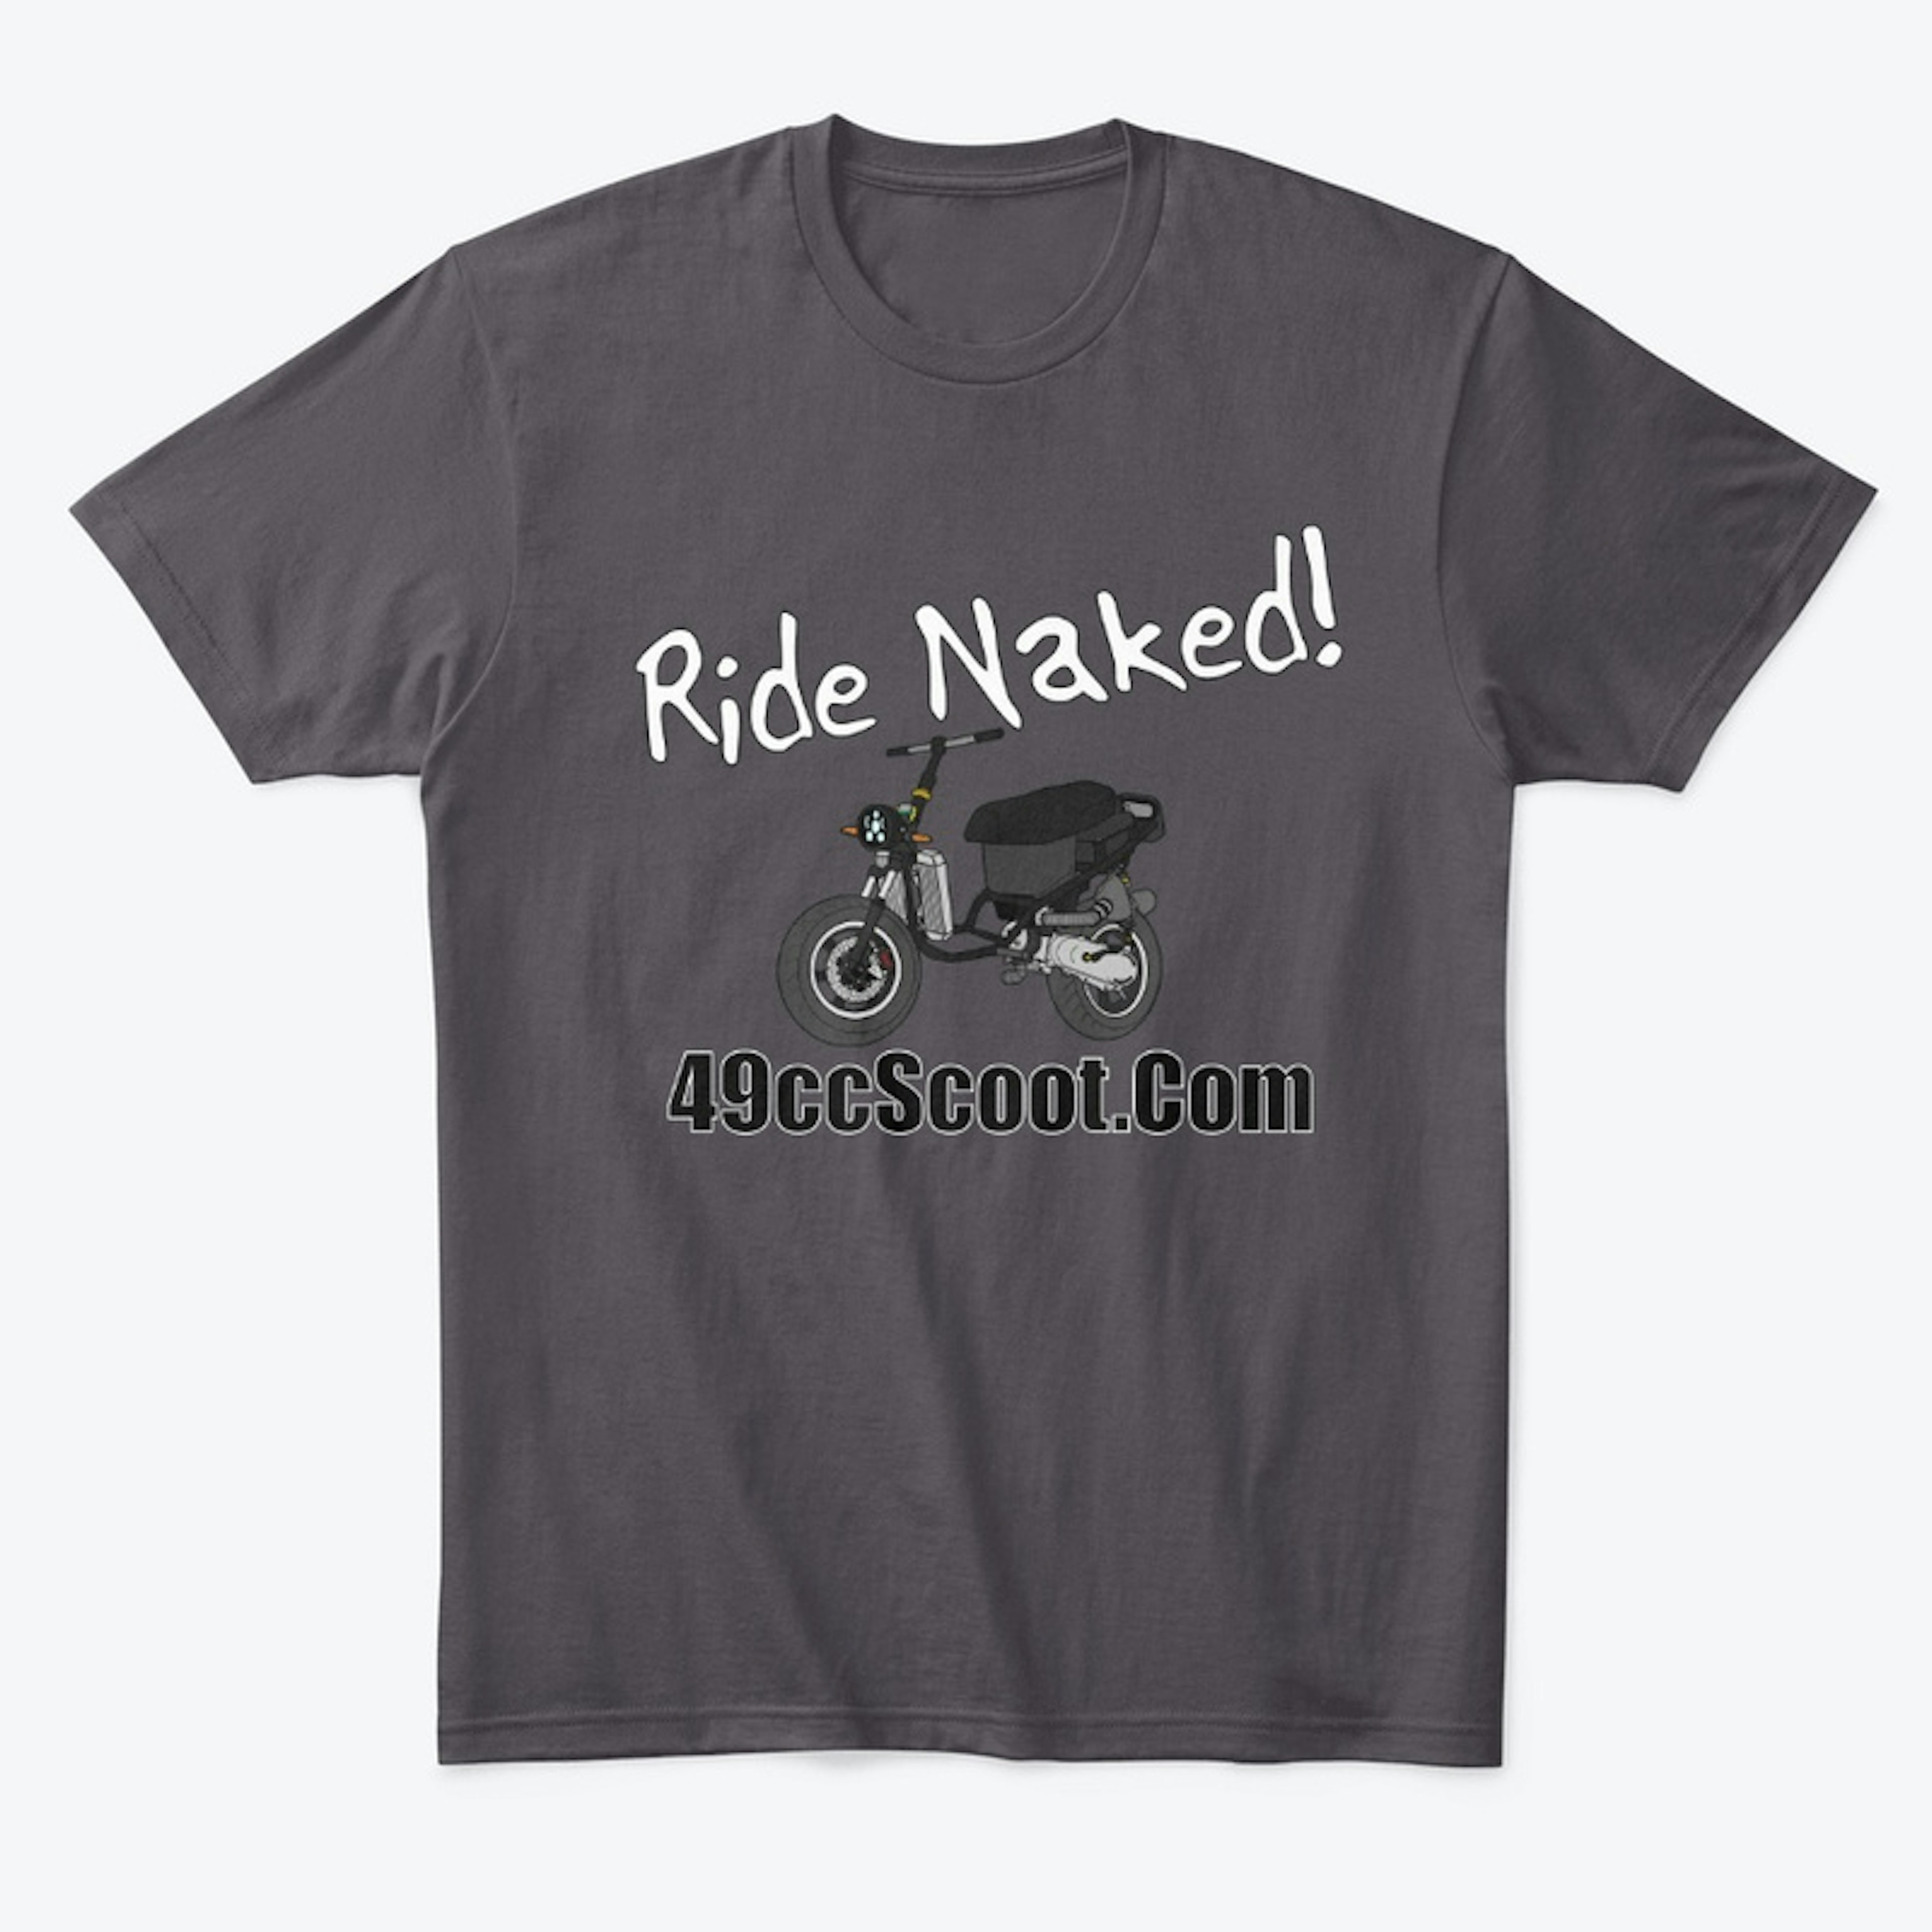 Ride Naked!